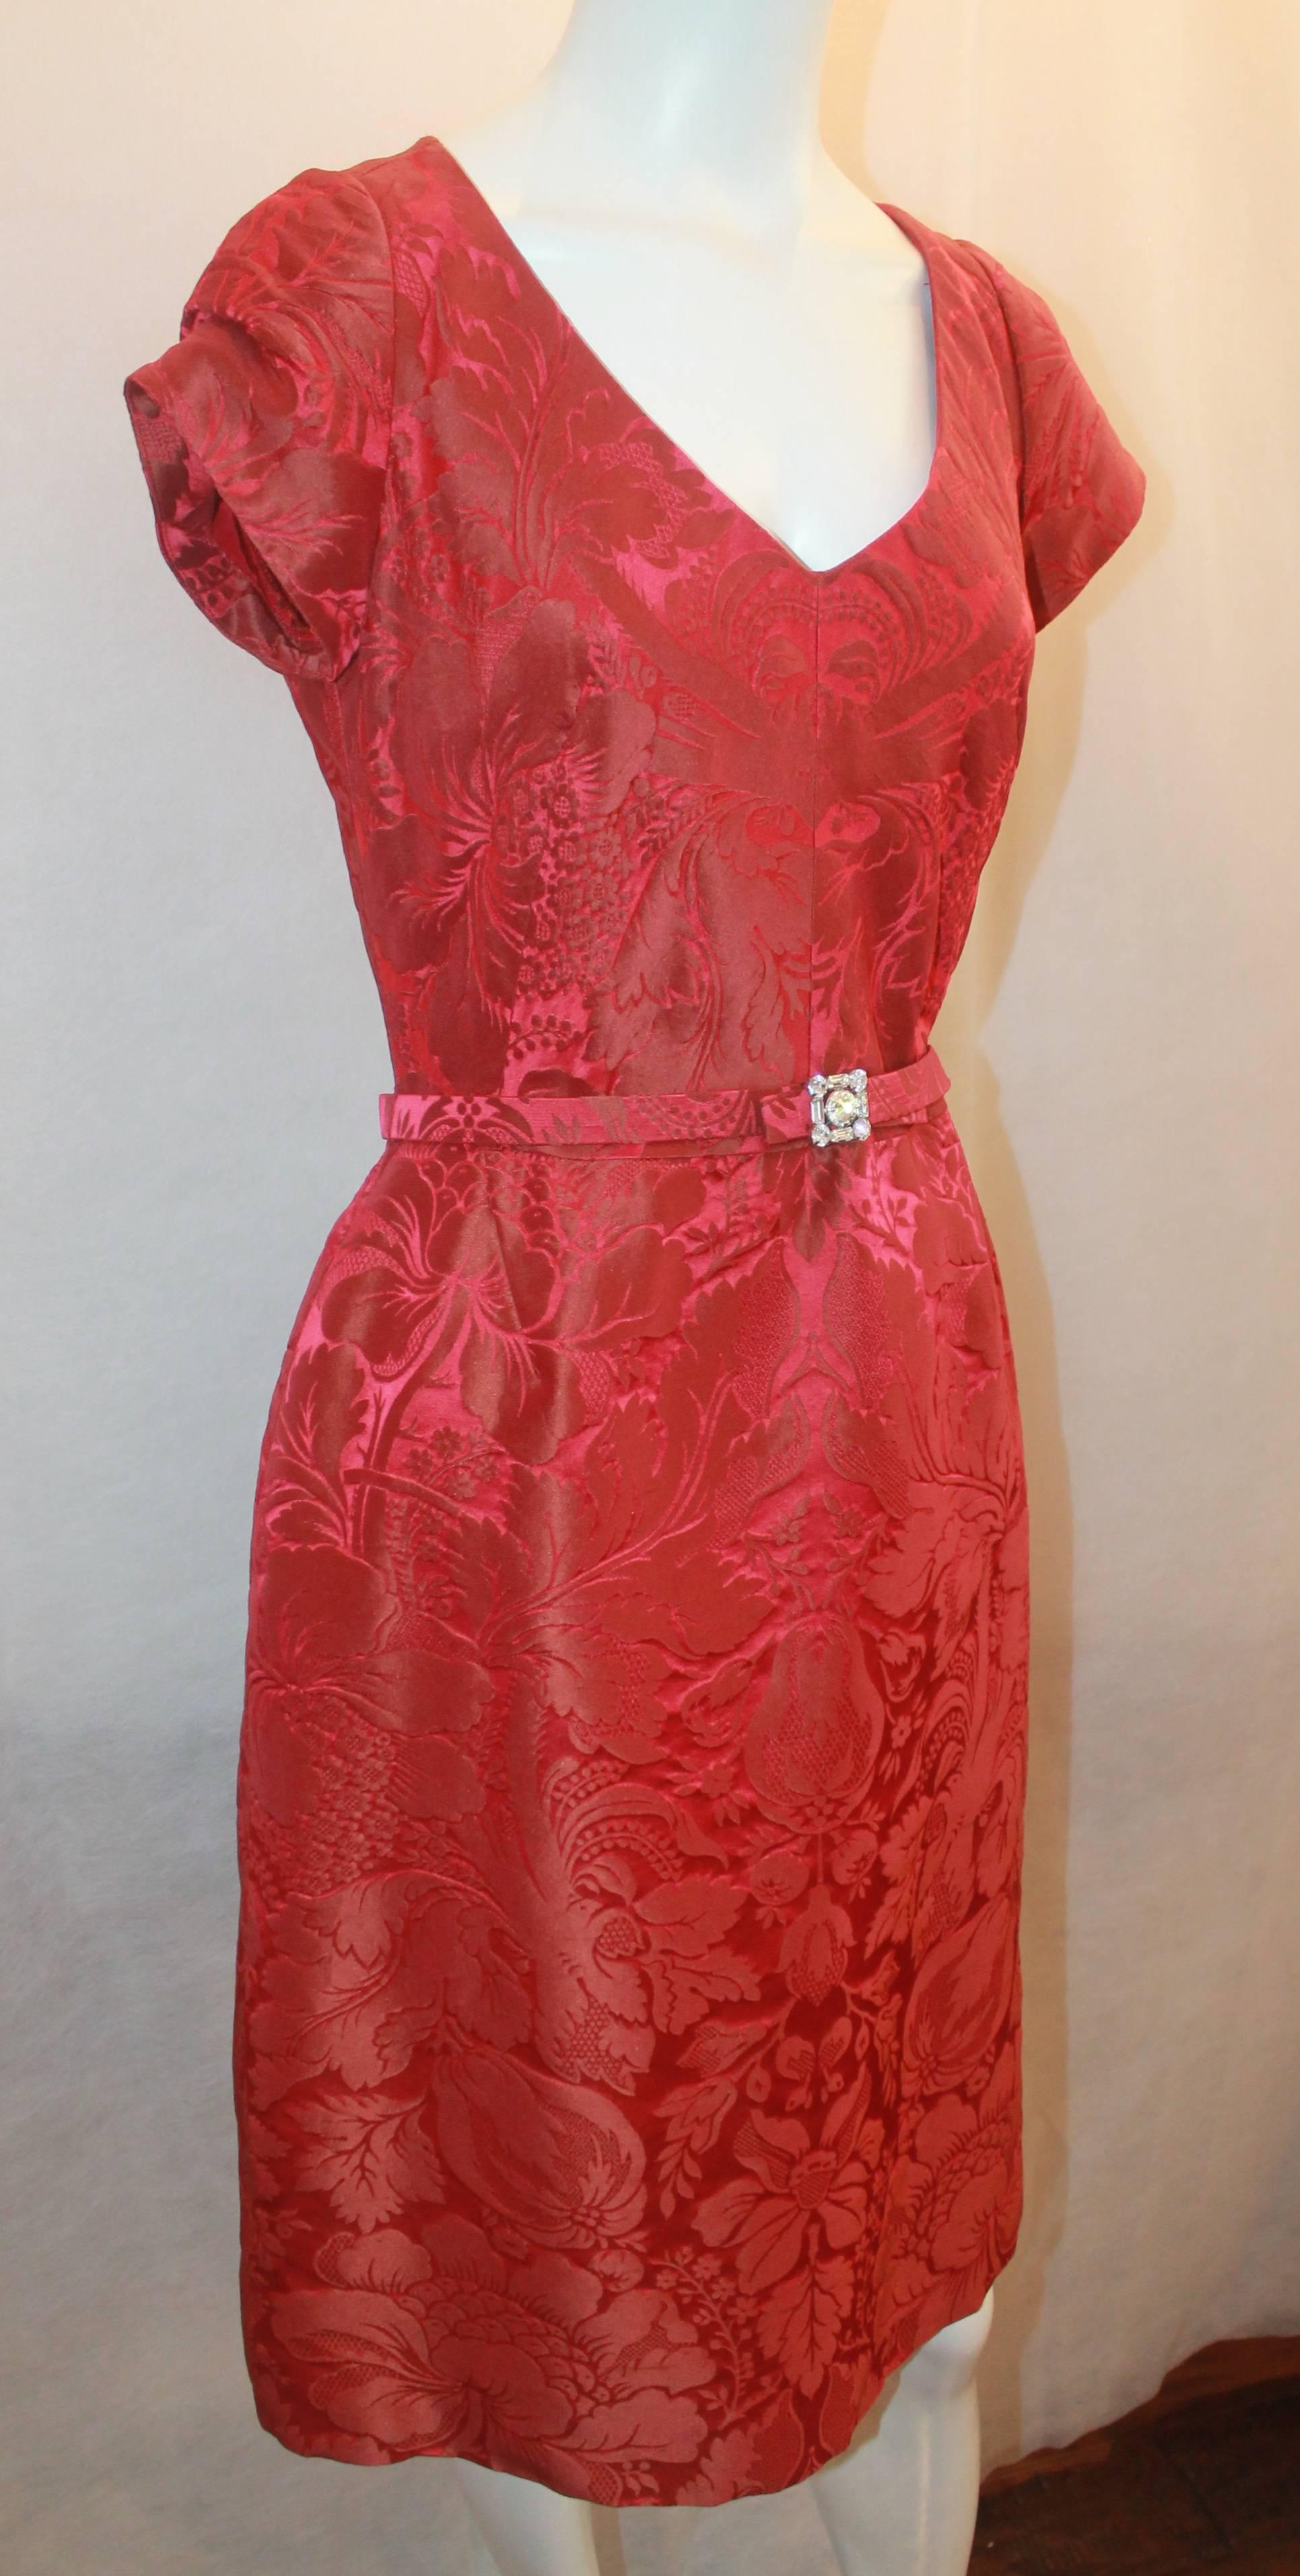 Oscar de la Renta Red Brocade Short Sleeve Dress  with Rhinestone Belt - 8. This dress is in excellent condition and fits amazingly. The zipper is in the back and the dress has a fitted bodice. It falls around the knees.

Measurements:
Bust-